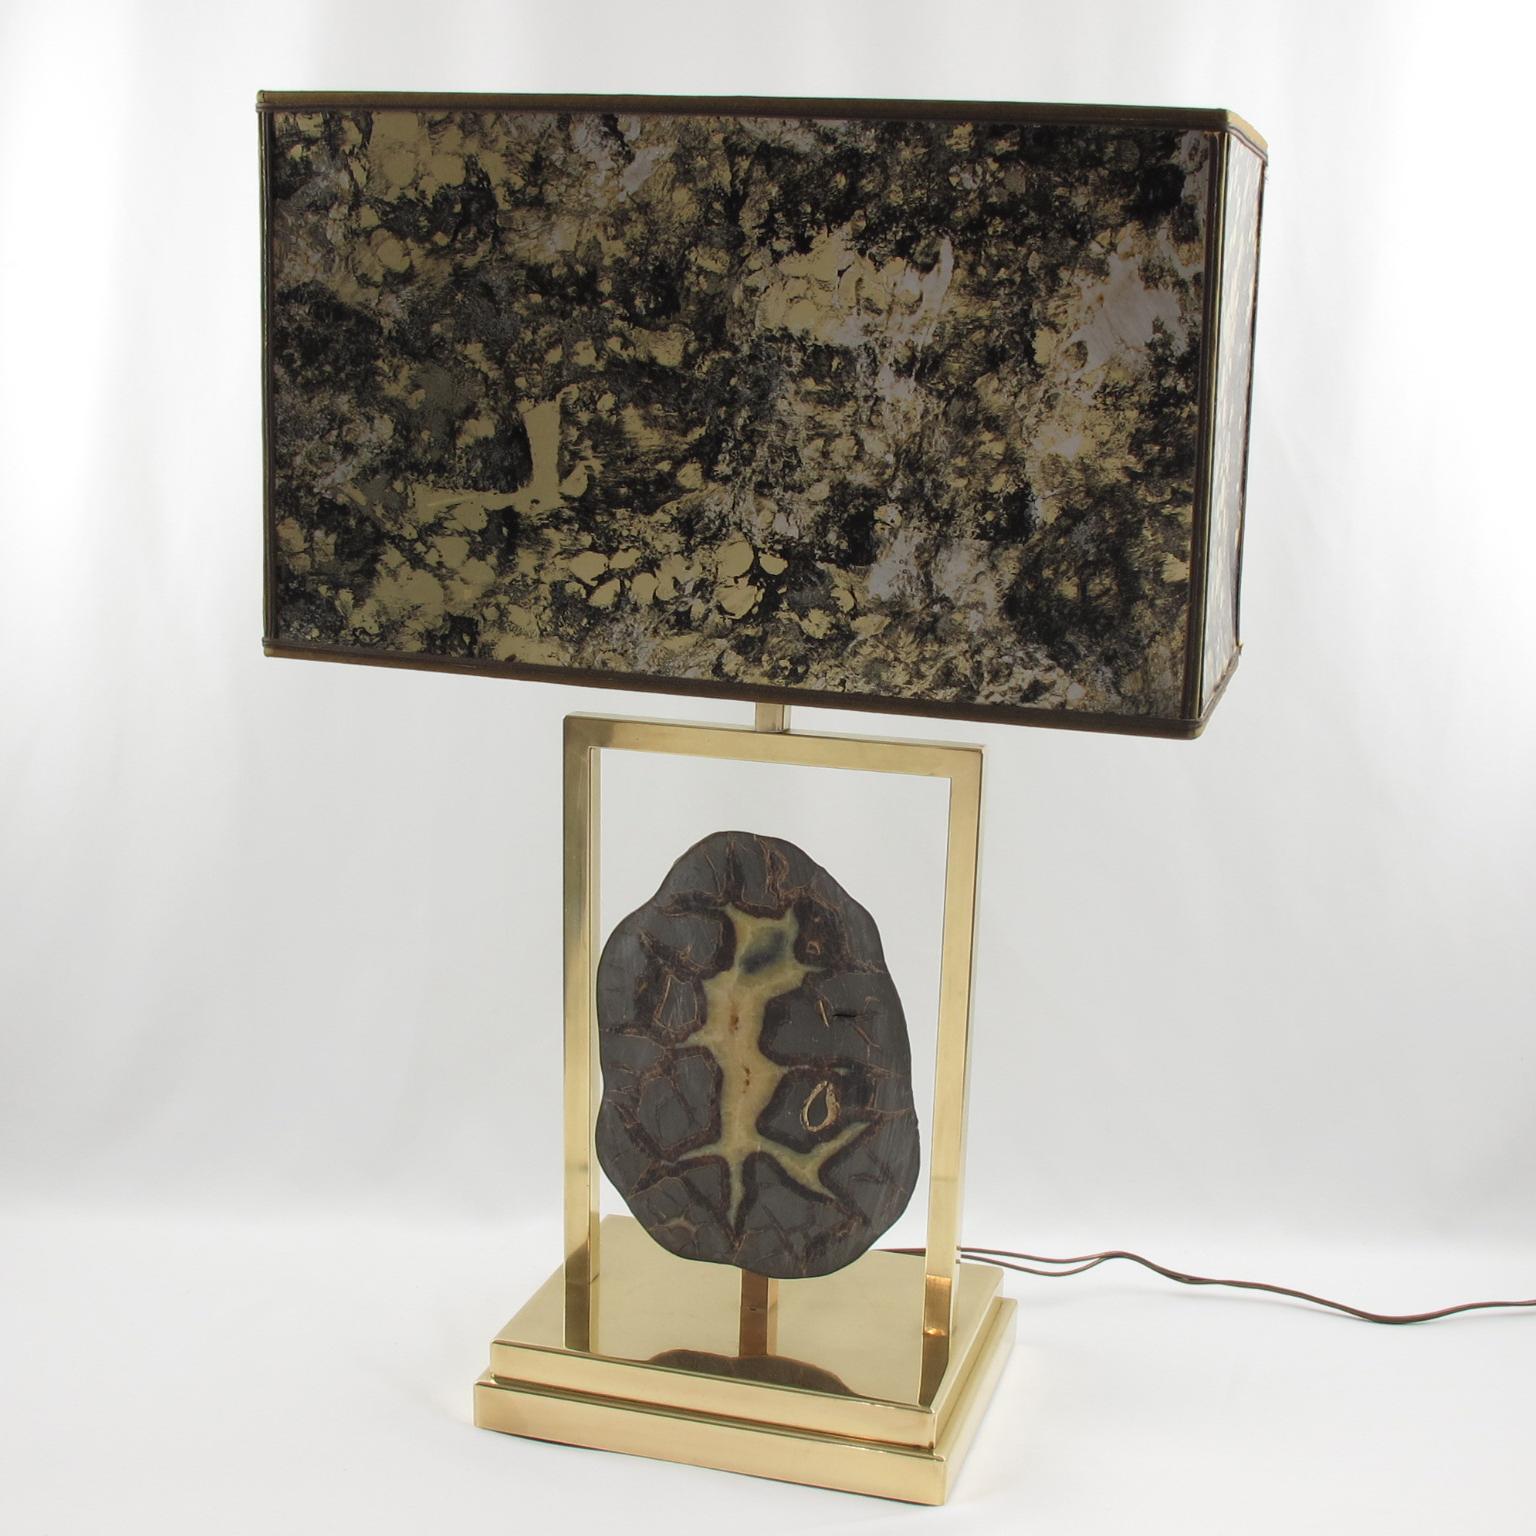 Willy Daro, Belgium, designed this elegant table lamp in the 1970s. The massive polished brass structure has an impressive Dragon Septarian geode stone slab. The original vintage shade, still present, boasts an incredible textured pattern with